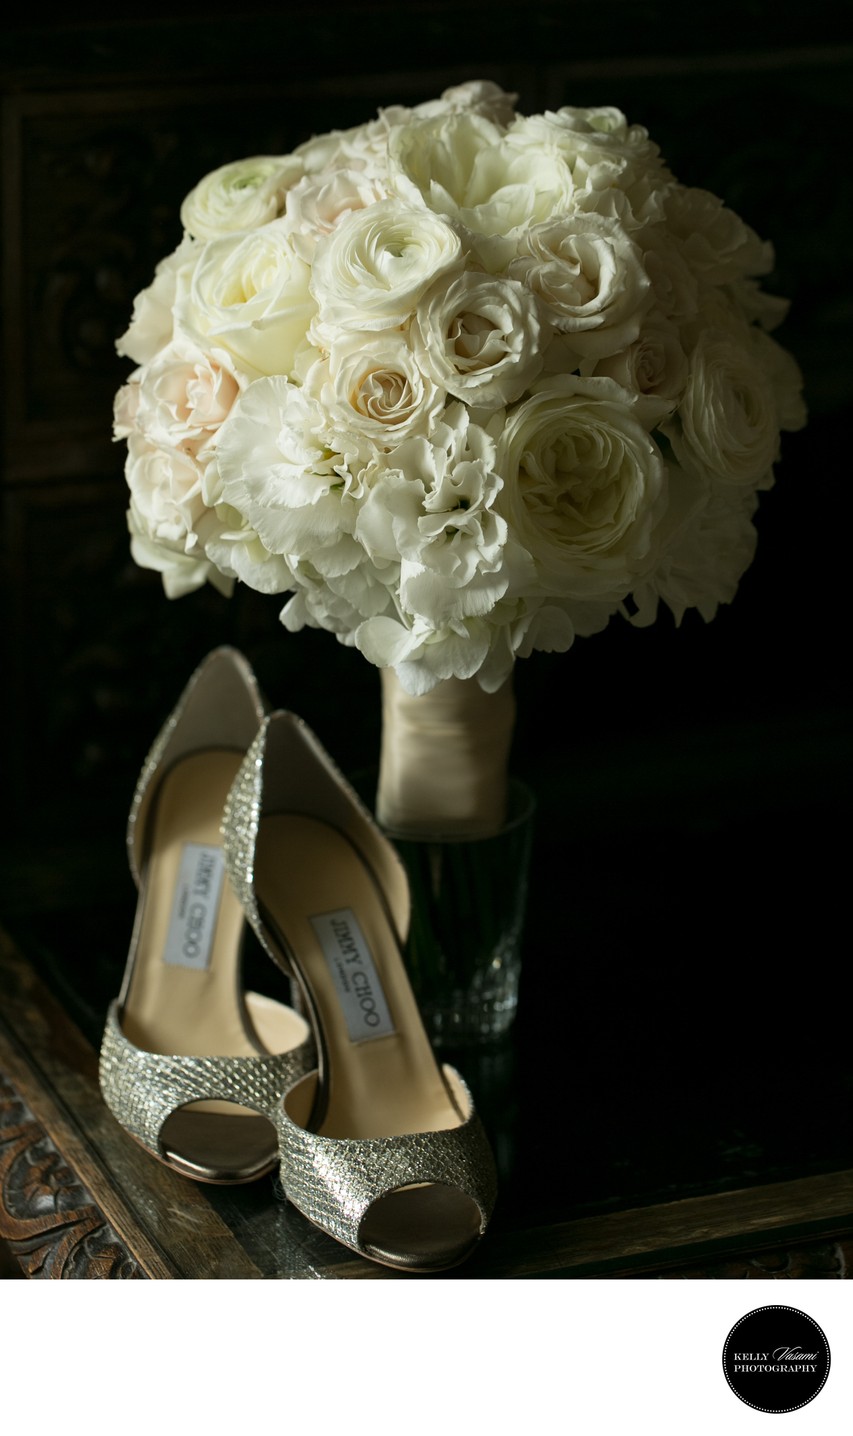 jimmy choo shoes and white wedding flowers